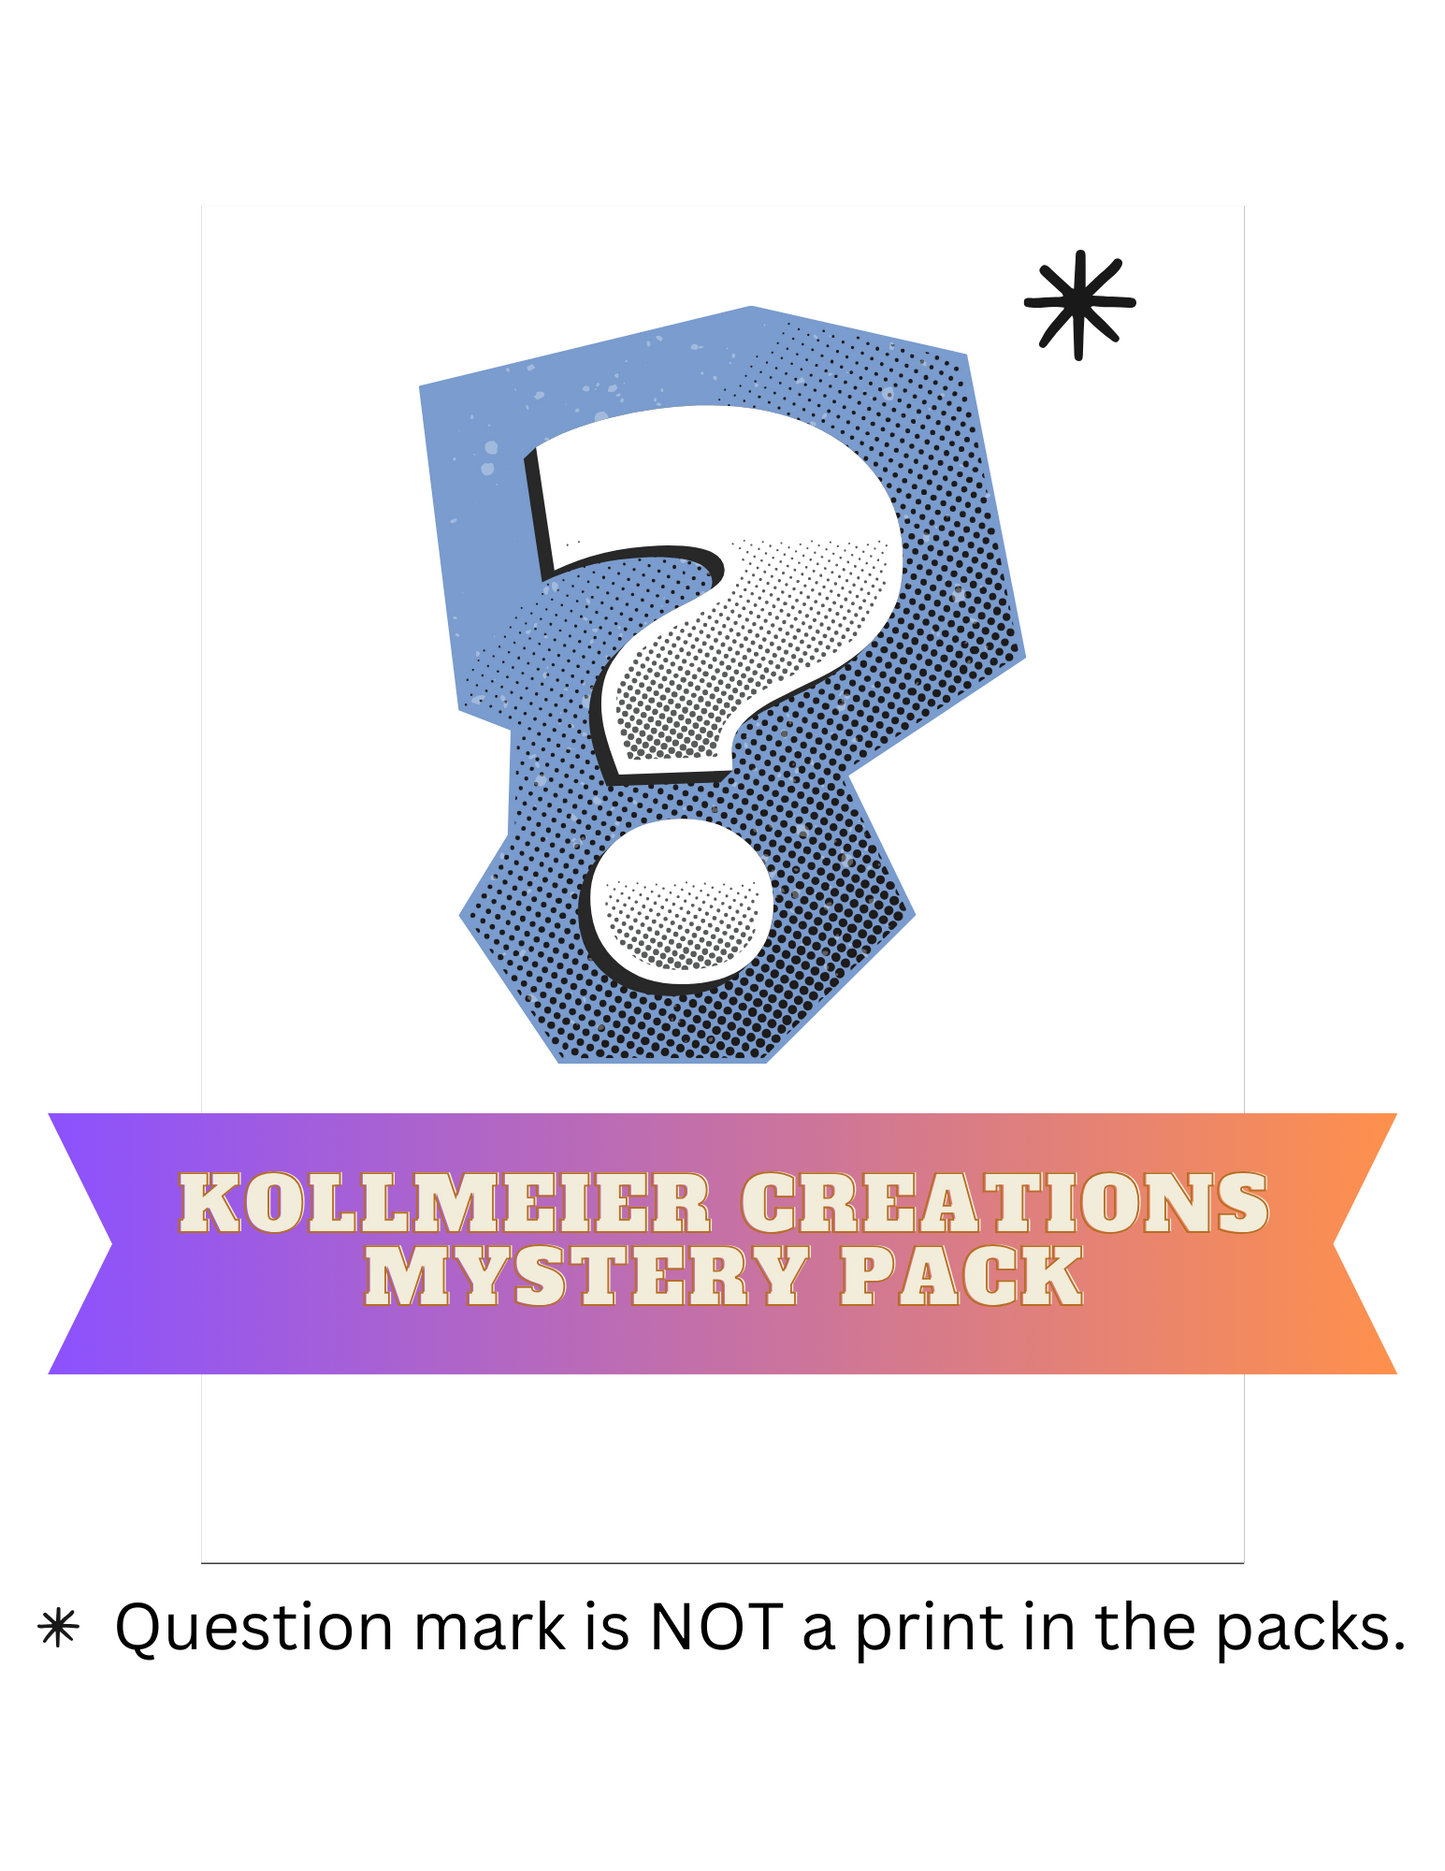 "Kollmeier Creations Mystery Pack" Premium Diamond Painting Release Papers